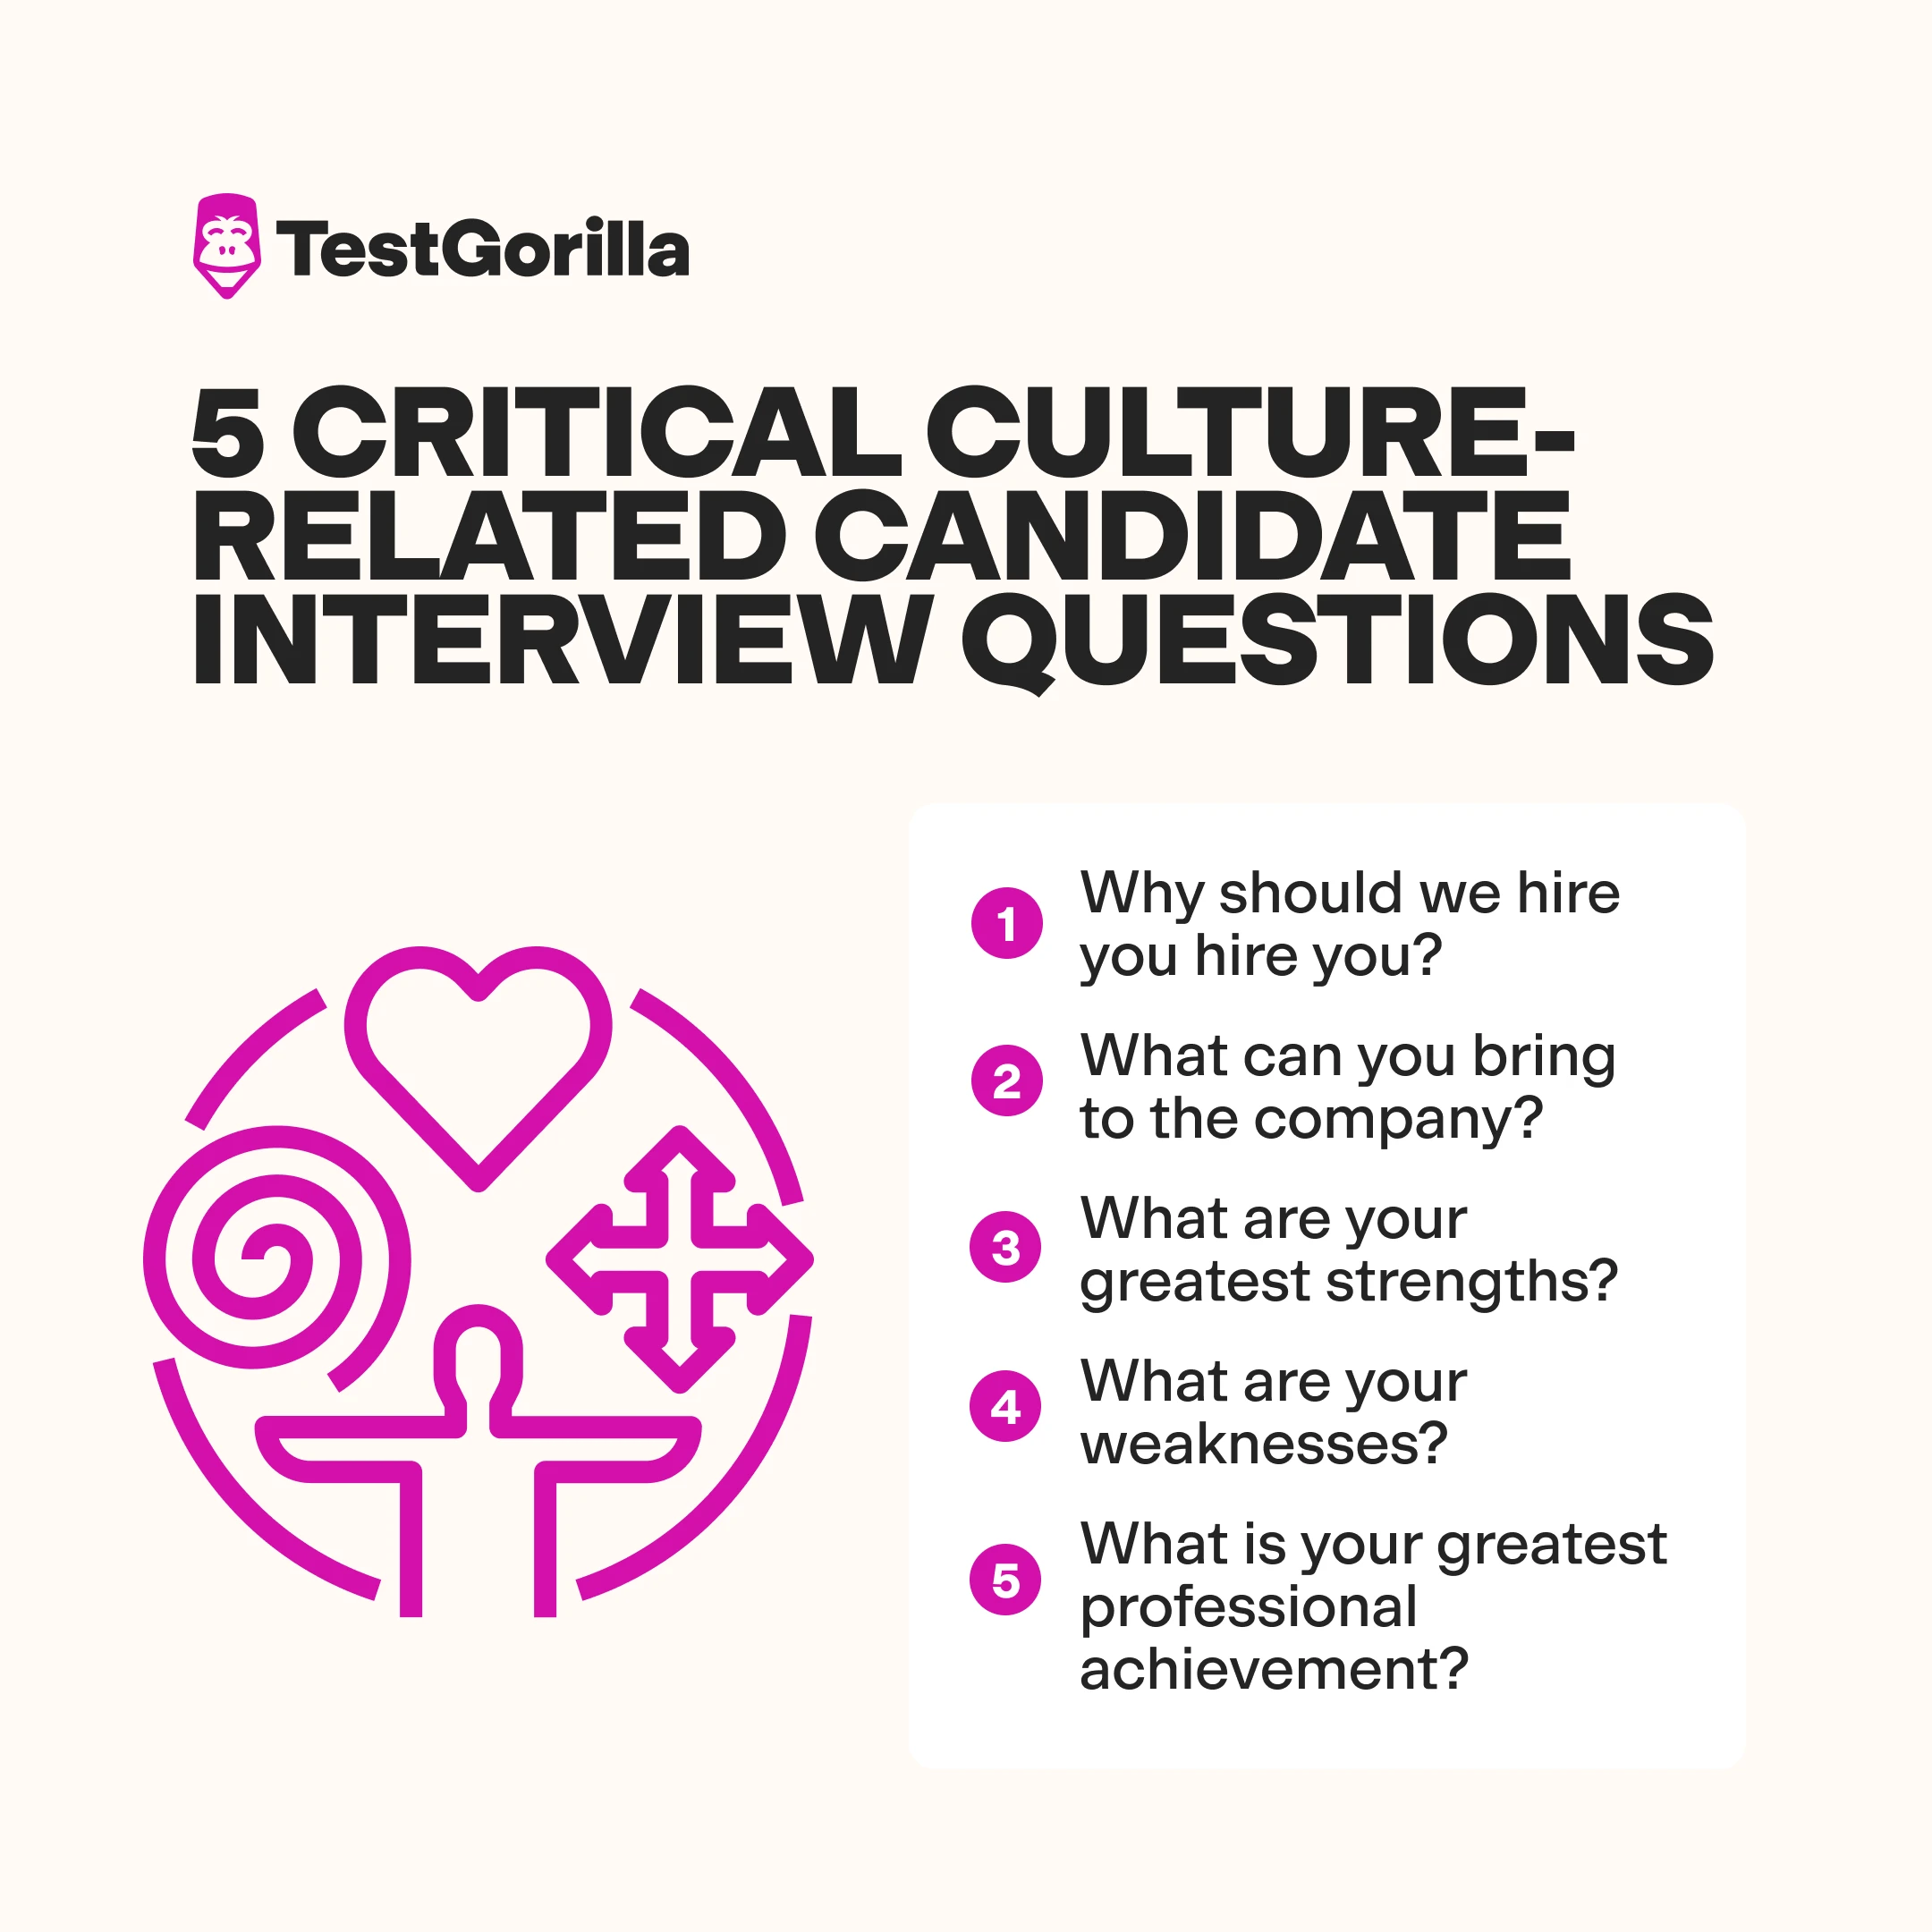 5 critical culture-related candidate interview questions